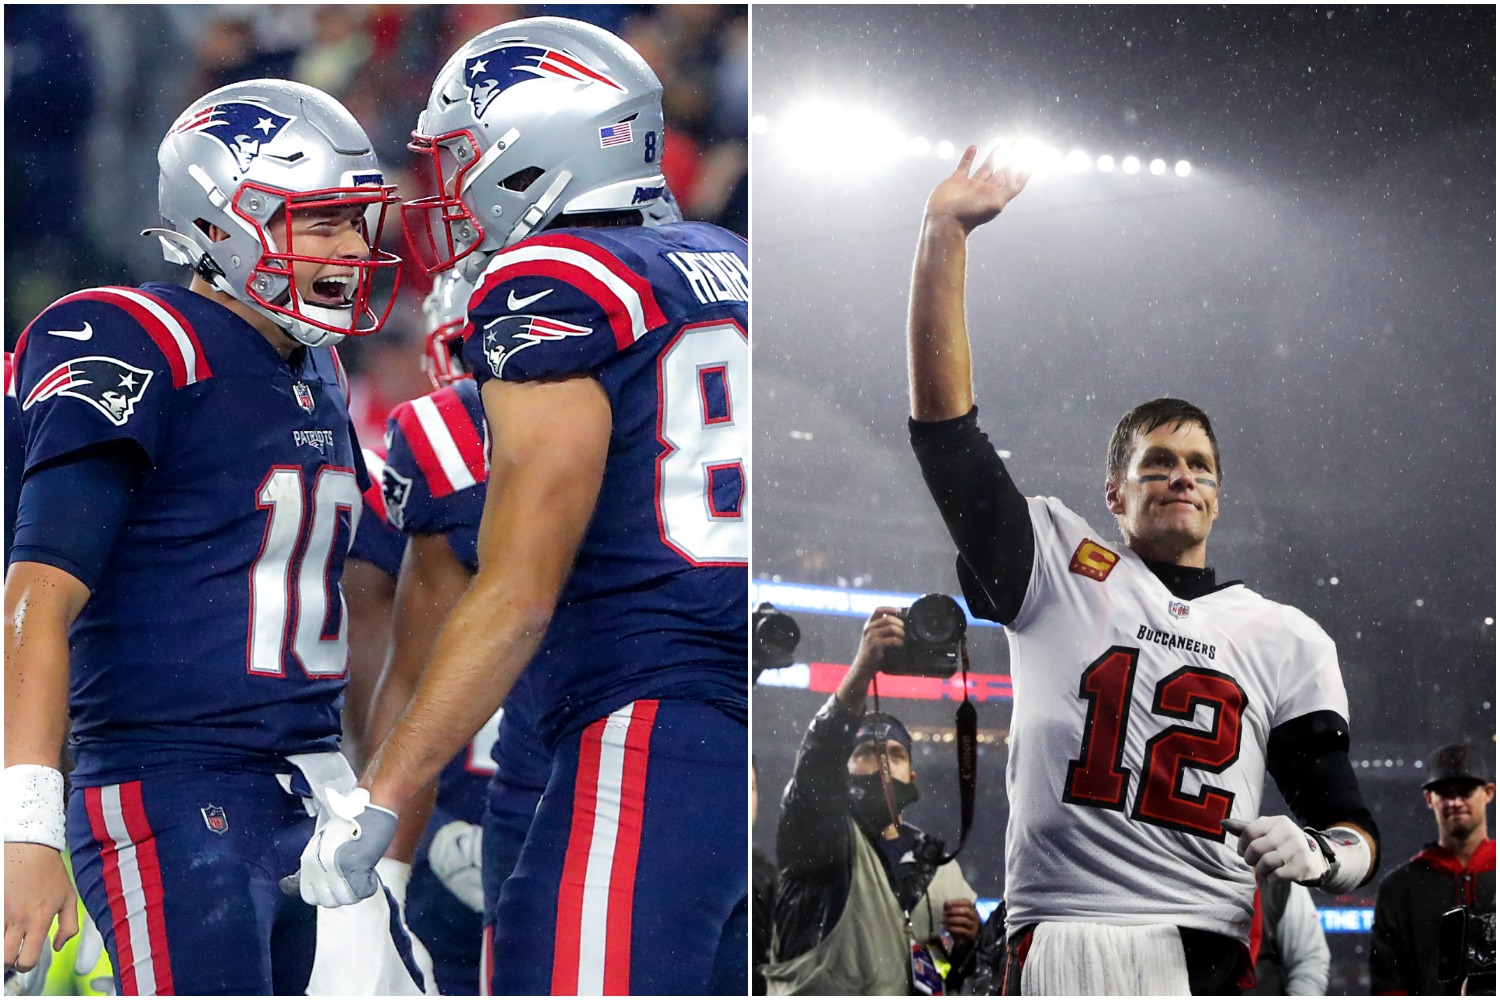 Patriots QB Mac Jones celebrates scoring a touchdown with Hunter Henry while Buccaneers QB Tom Brady waves to the fans as he exits the field at Gillette Stadium.